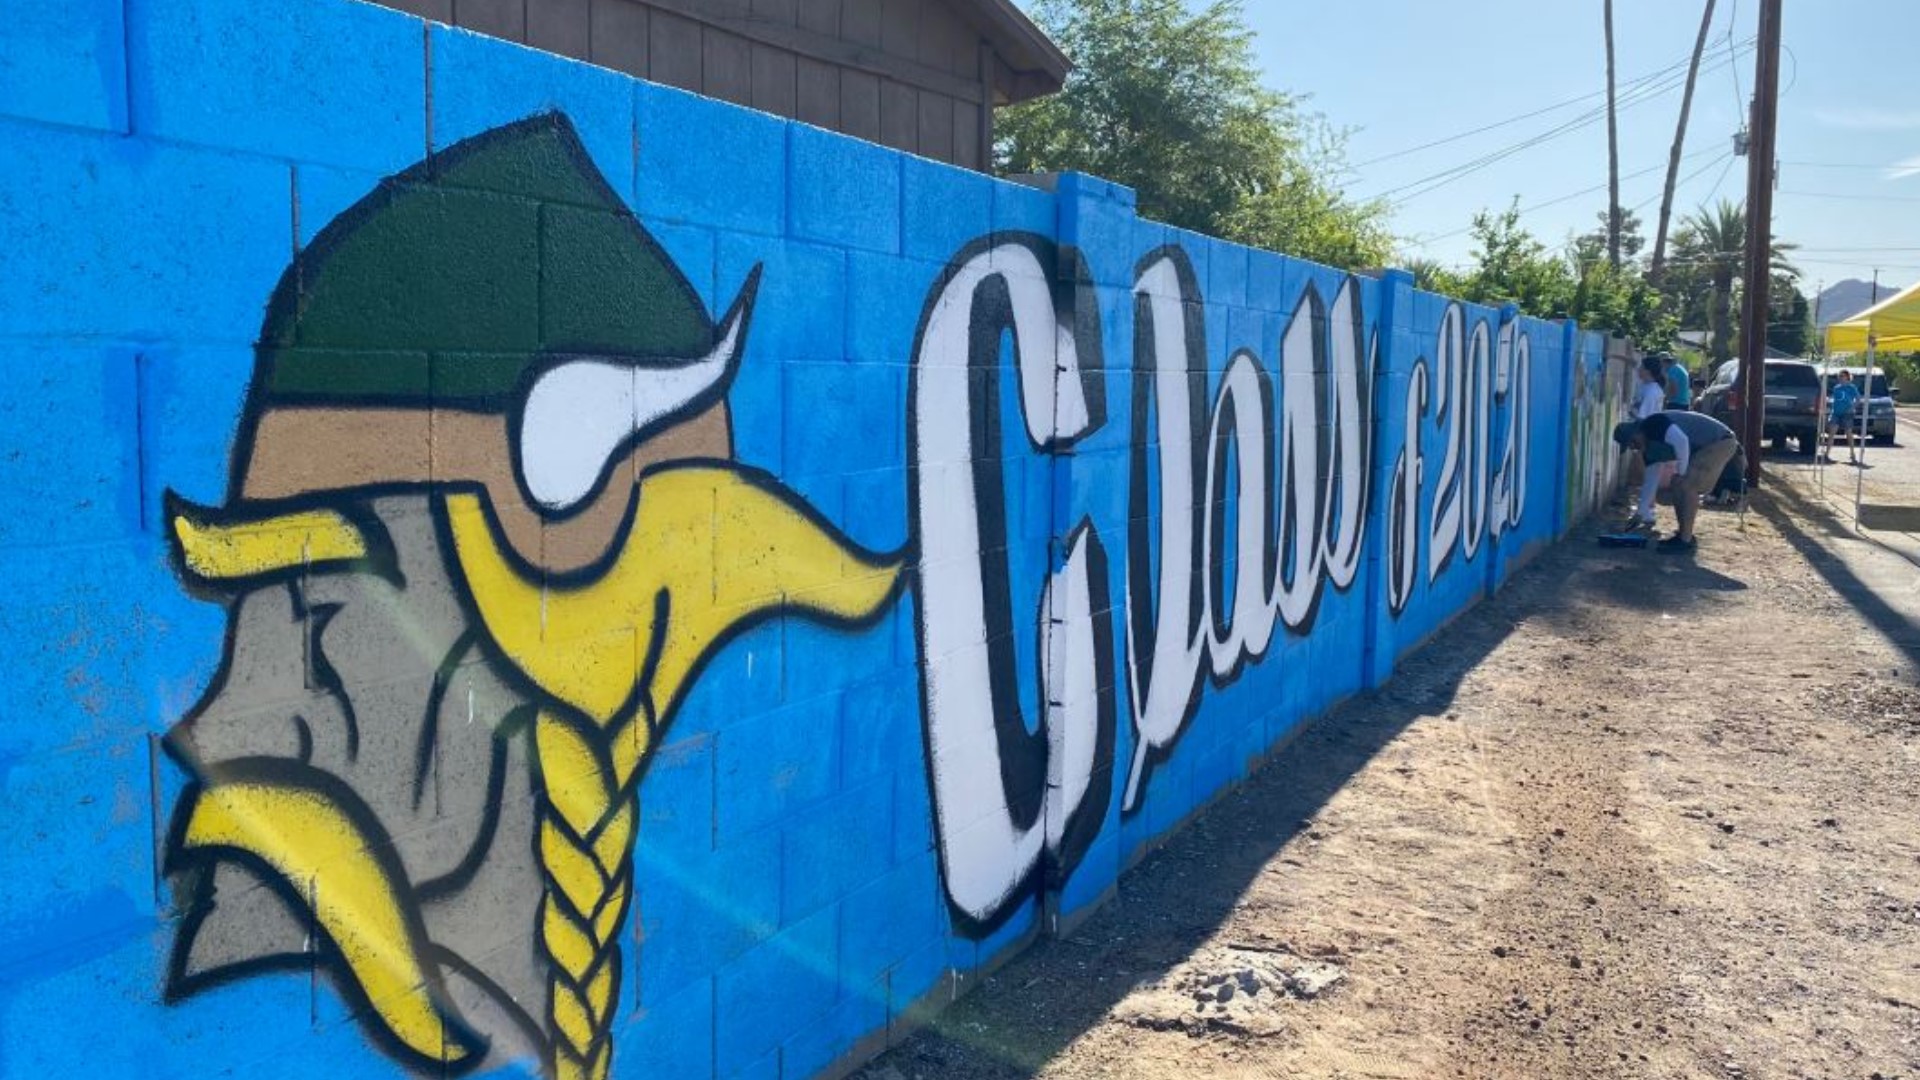 The Sunnyslope community in North Phoenix has found a way to celebrate their graduating seniors in the ago of COVID-19. A mural will pay tribute to the Class of 2020